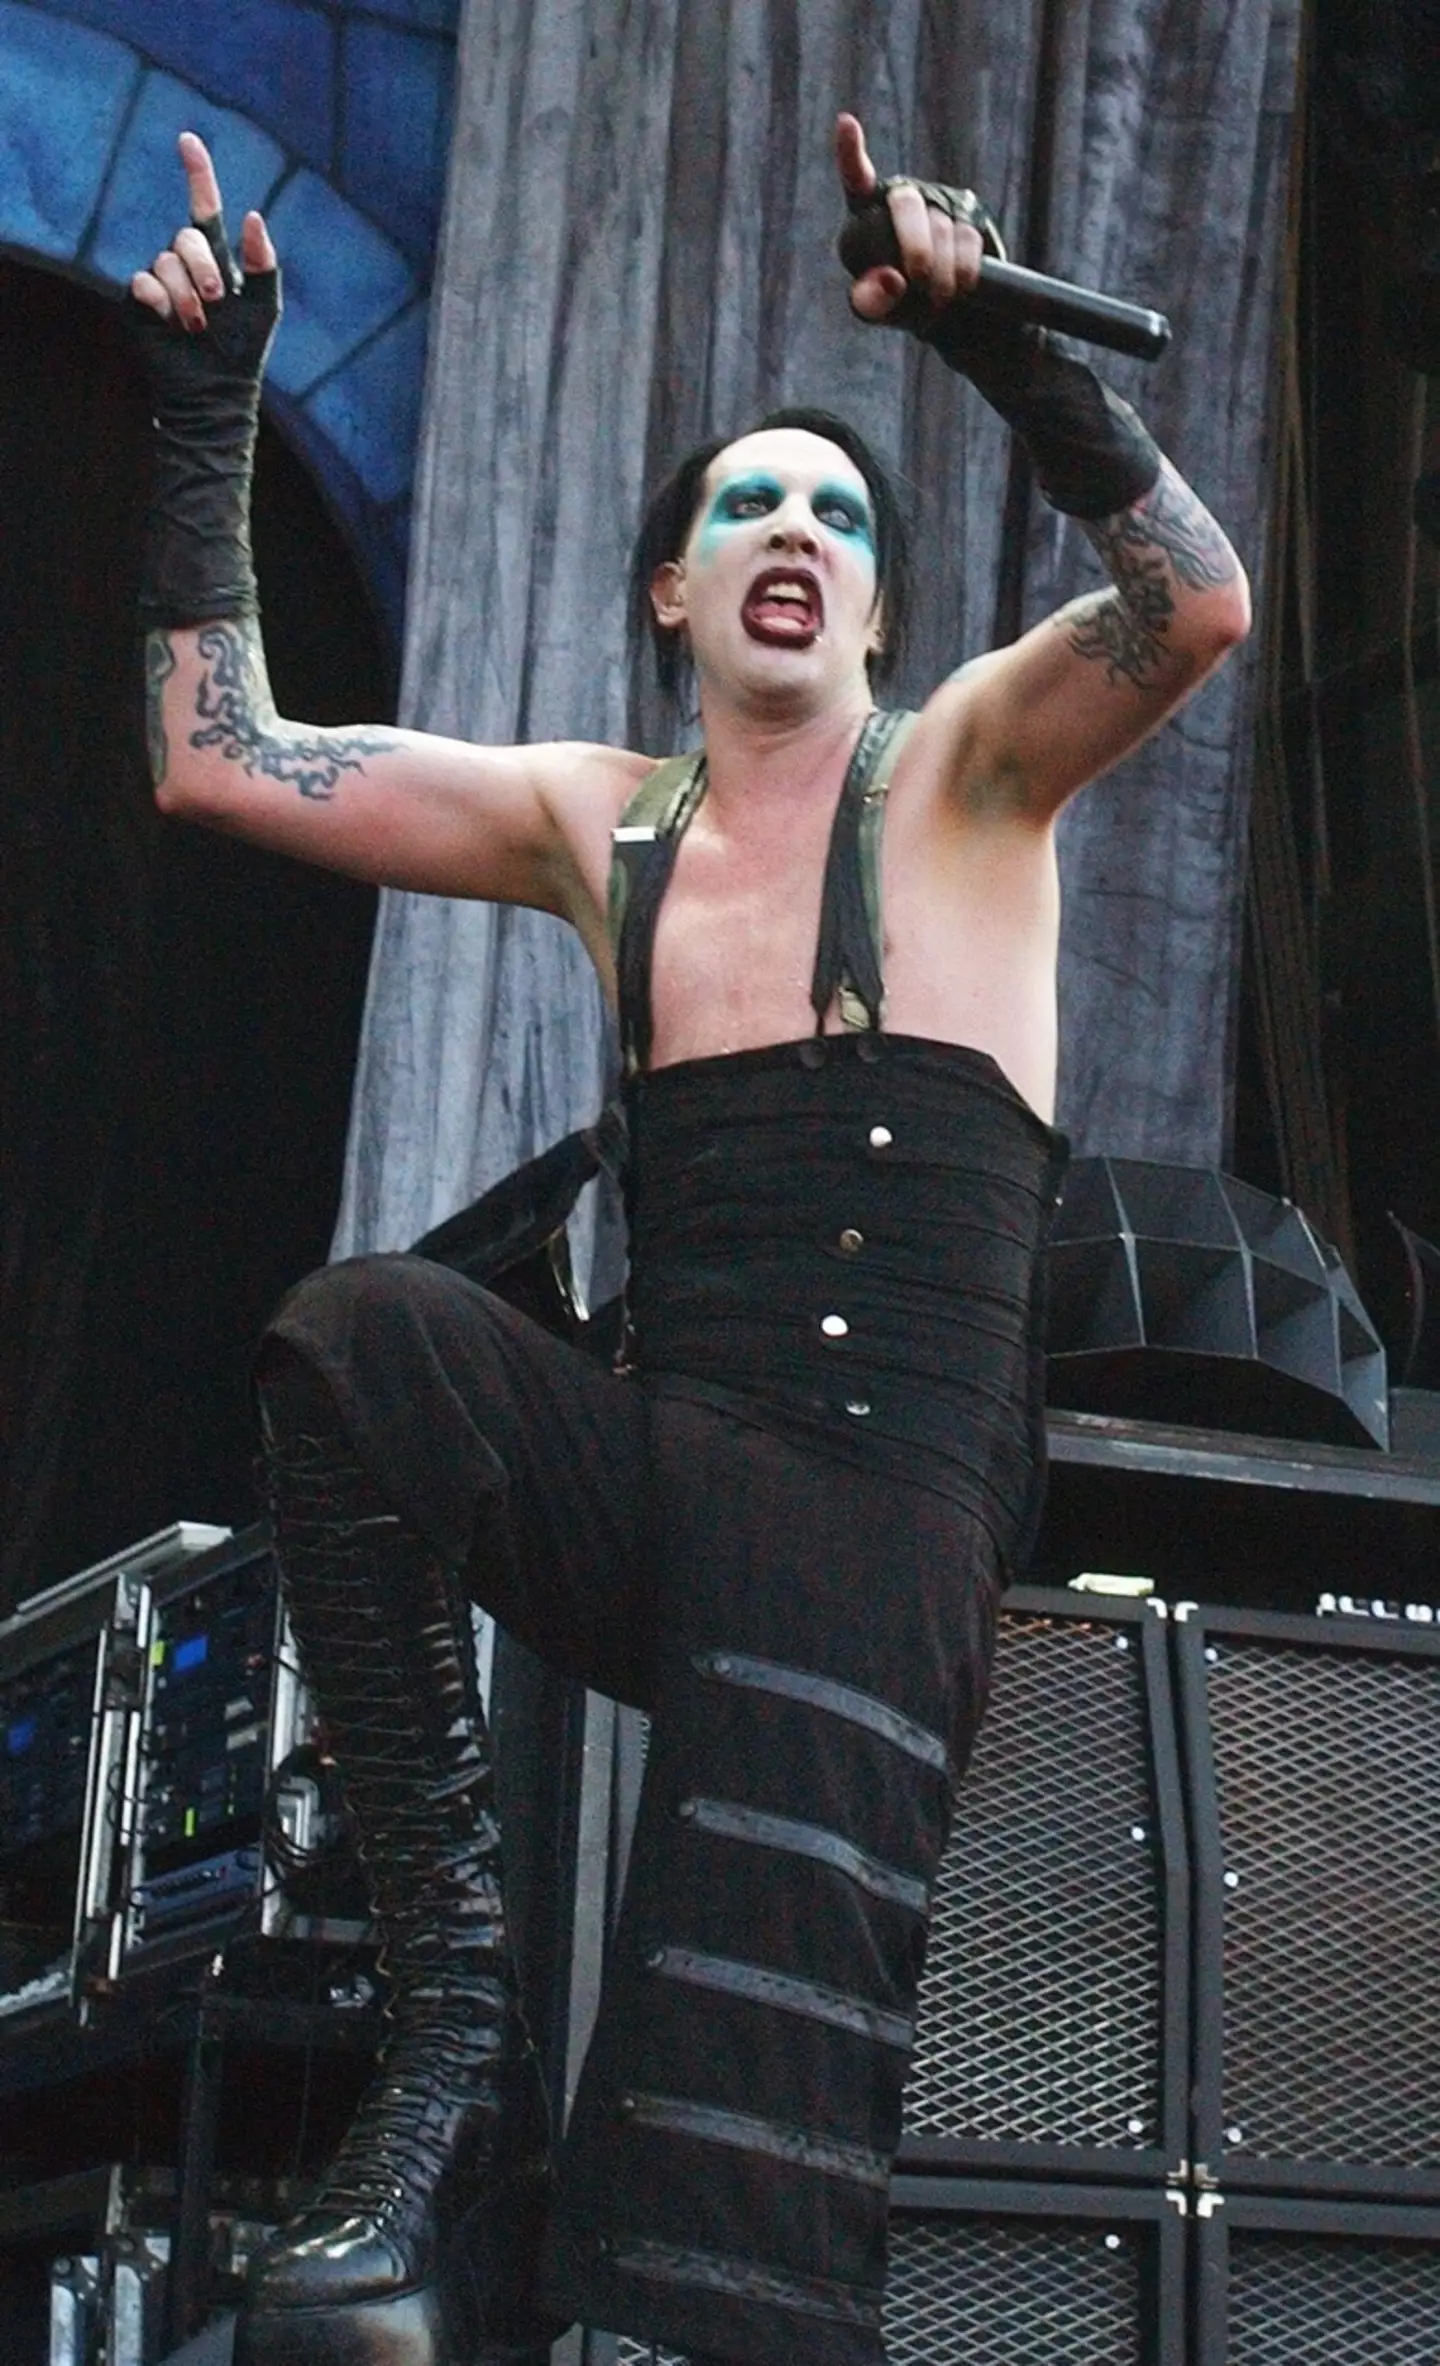 Everyone has heard the rumour that Marilyn Manson removed a rib so he could pleasure himself.